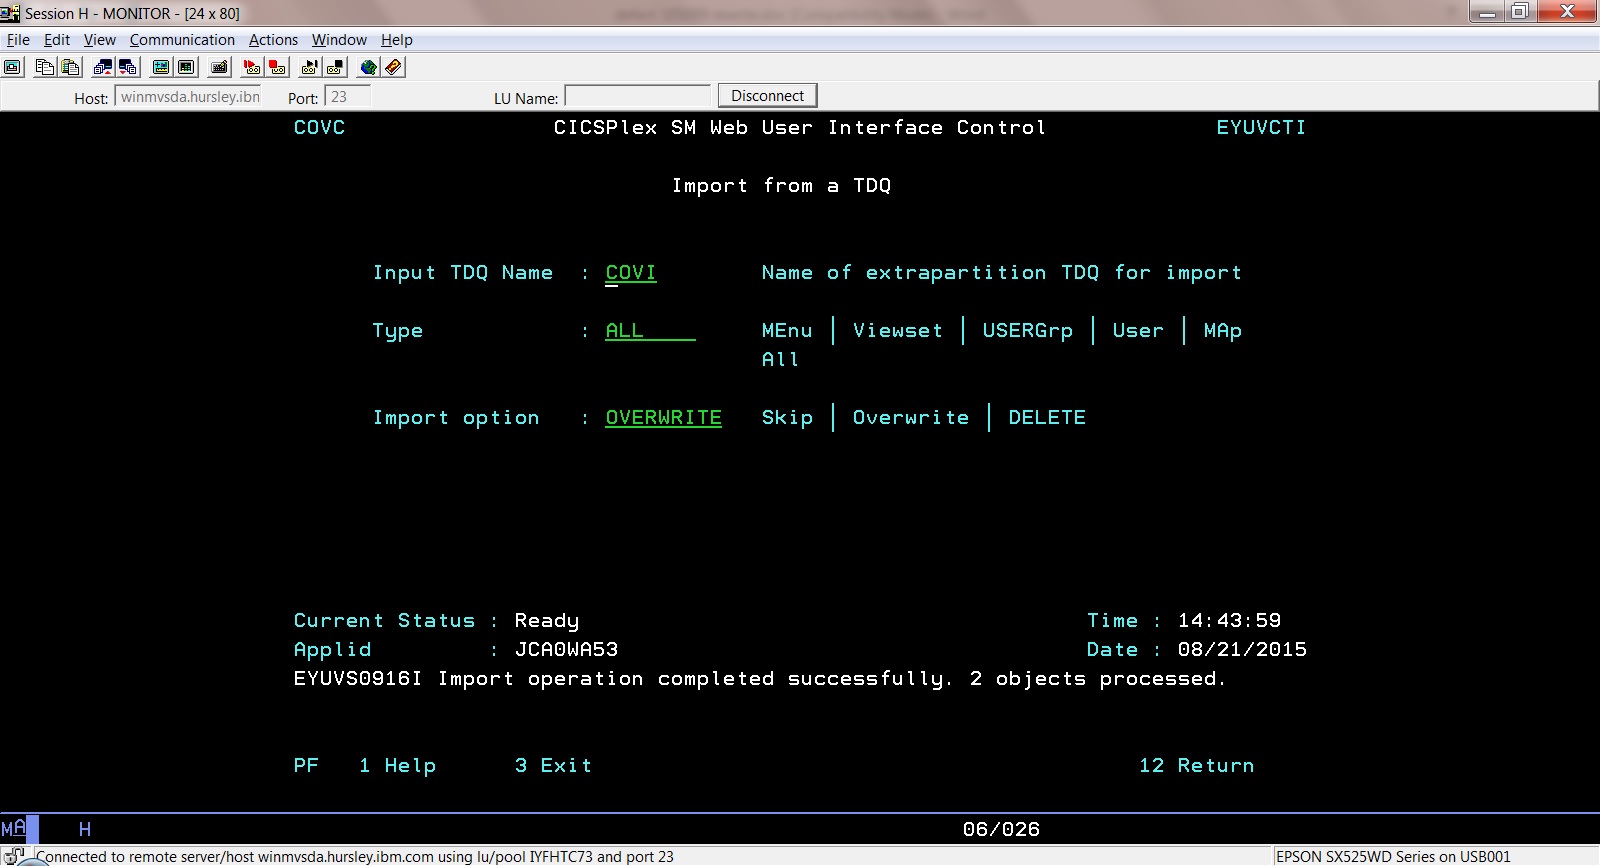 This screenshot from the CPSM WUI Import shows the use of COVC Import